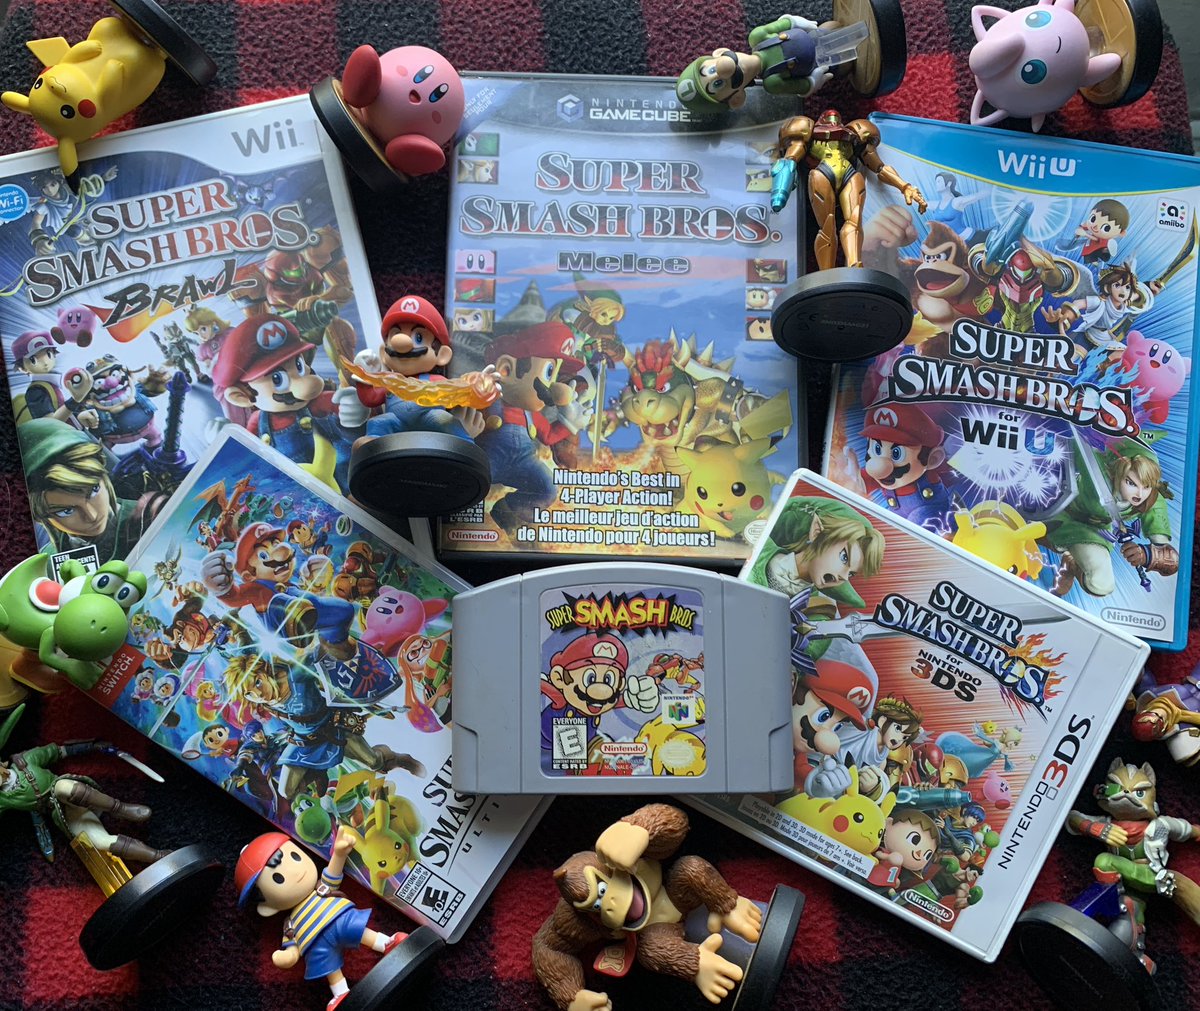 Super Smash Bros for the Nintendo 64 is 25 years old today!! 

Crazy how big this game ended up getting.

What is your favourite version or characters to play?!?